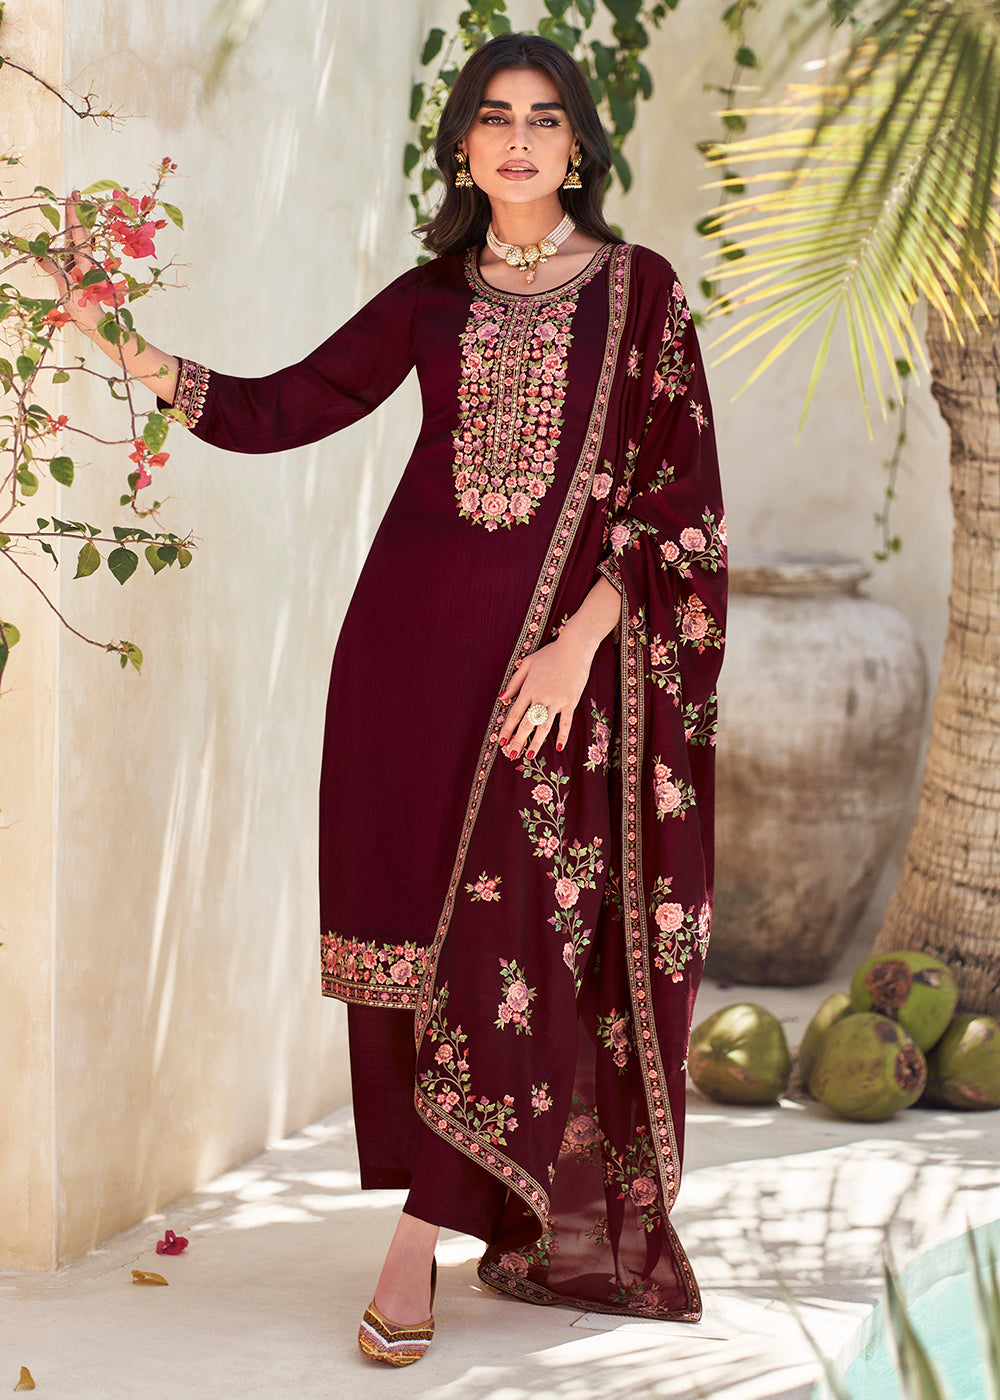 Buy Now Maroon Premium Silk Thread Embroidered Salwar Suit Online in USA, UK, Canada, Germany, Australia & Worldwide at Empress Clothing. 